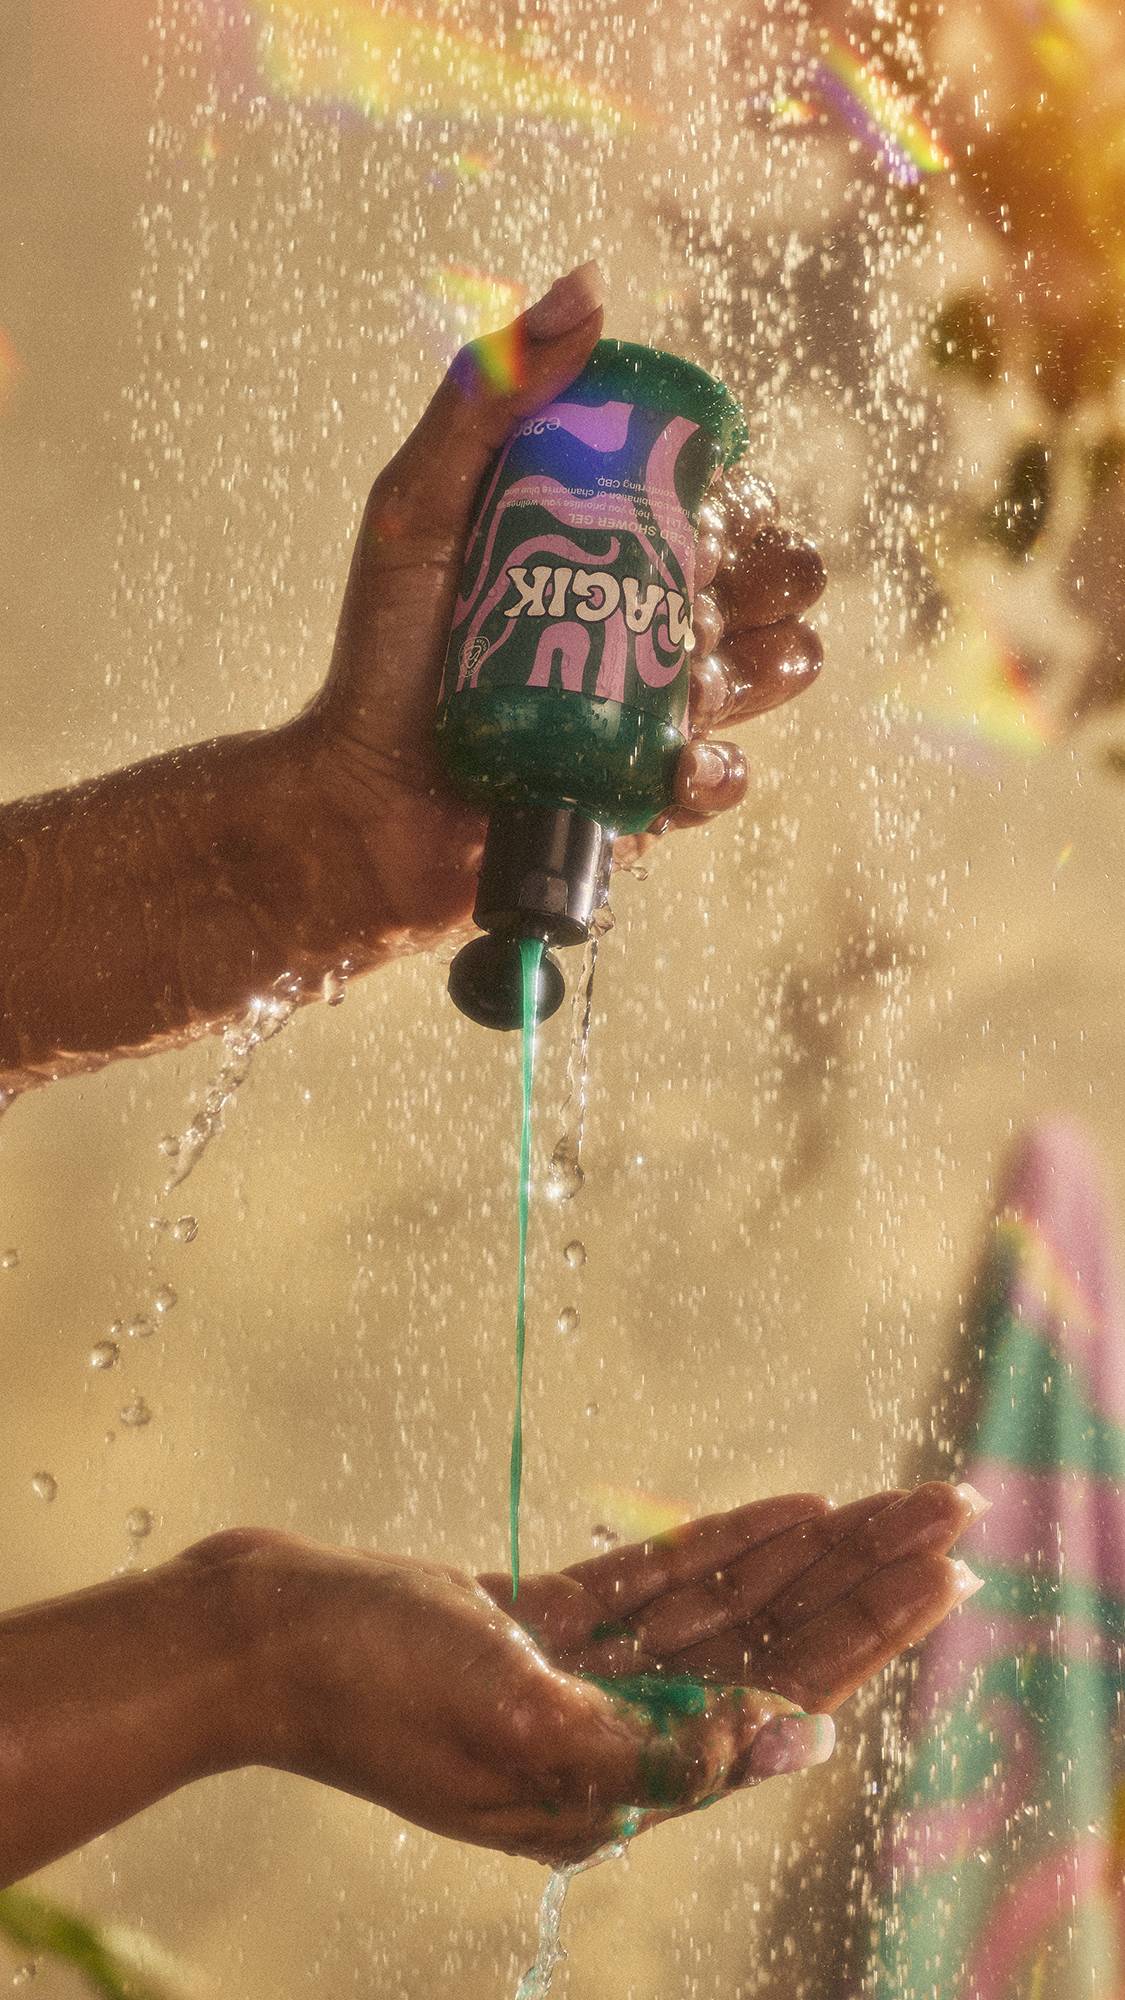 A close-up of the model's hands under running shower water as they squeeze the thick, shimmering green shower gel from the product bottle into their hand. The image has flecks of rainbow reflections on a warm, sepia tone. 